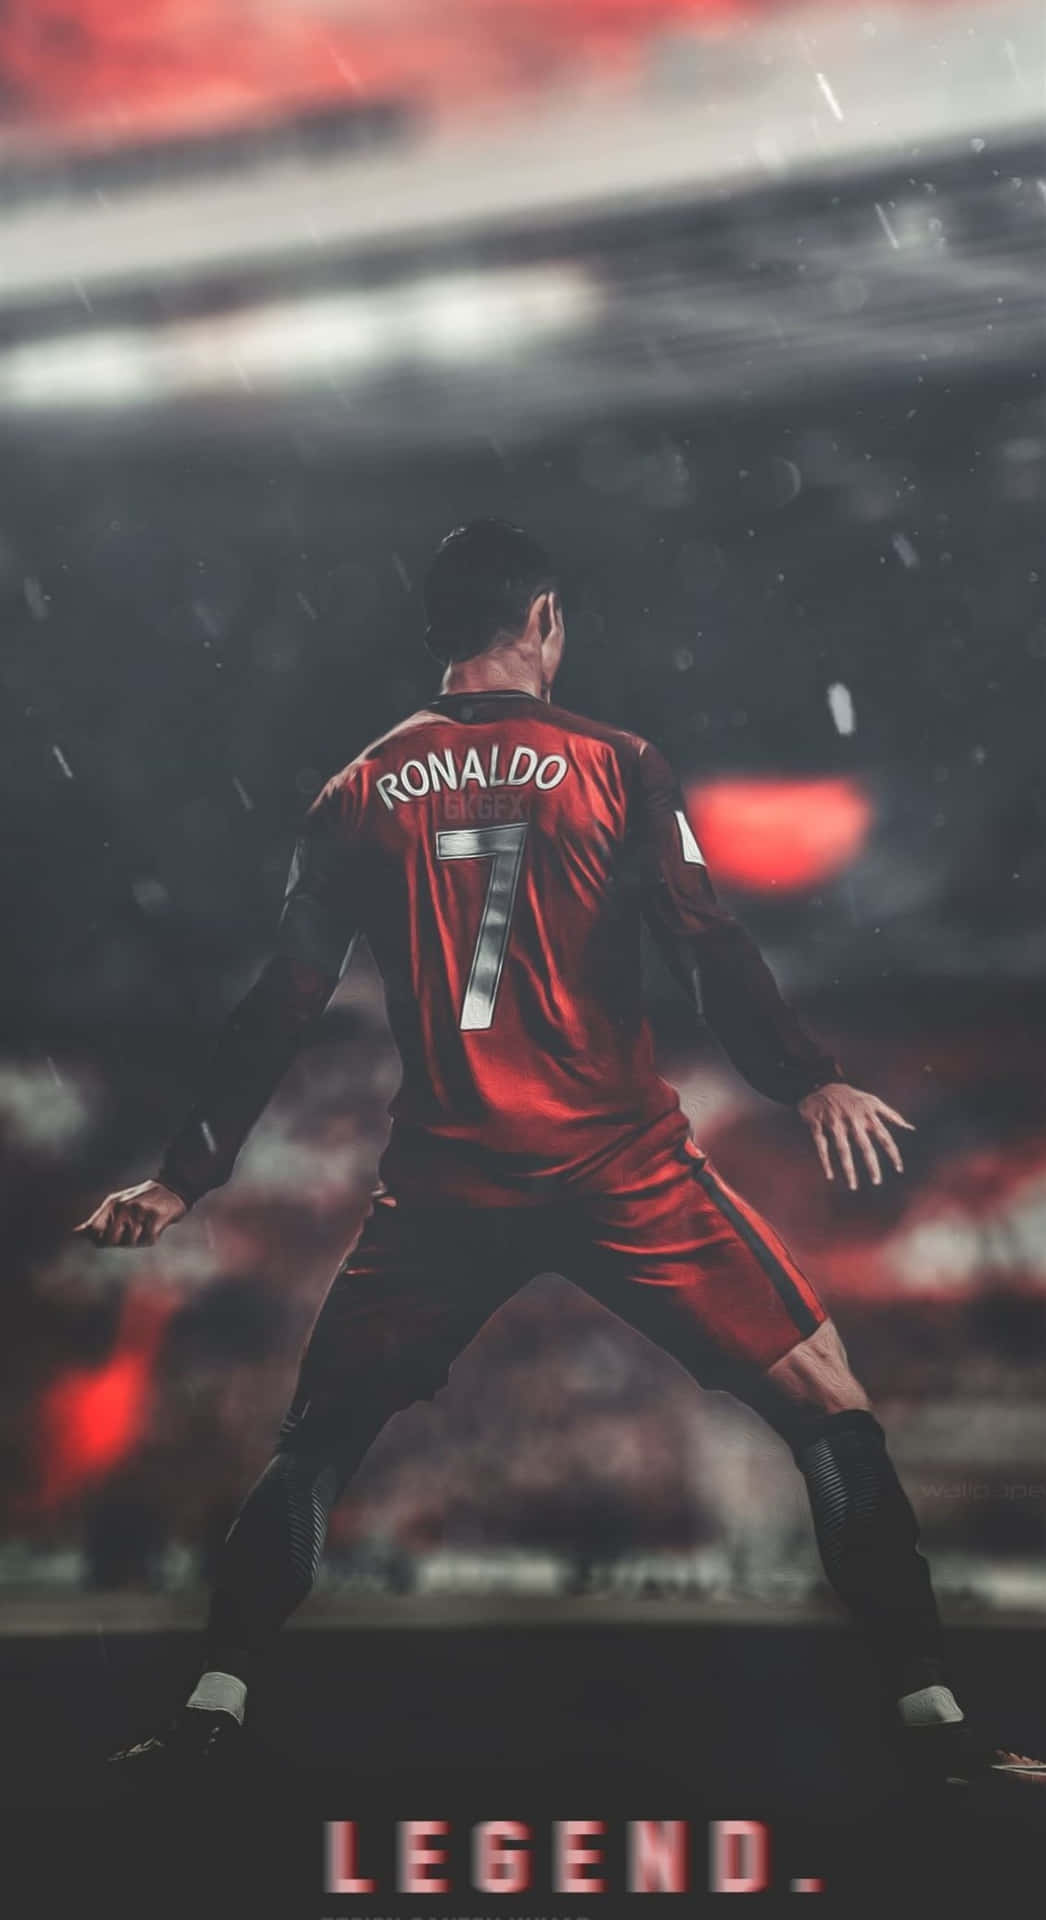 Cristiano Ronaldo Wallpaper iPhone with high-resolution 1080x1920 pixel. You can use this wallpaper for your iPhone 5, 6, 7, 8, X, XS, XR backgrounds, Mobile Screensaver, or iPad Lock Screen - Soccer